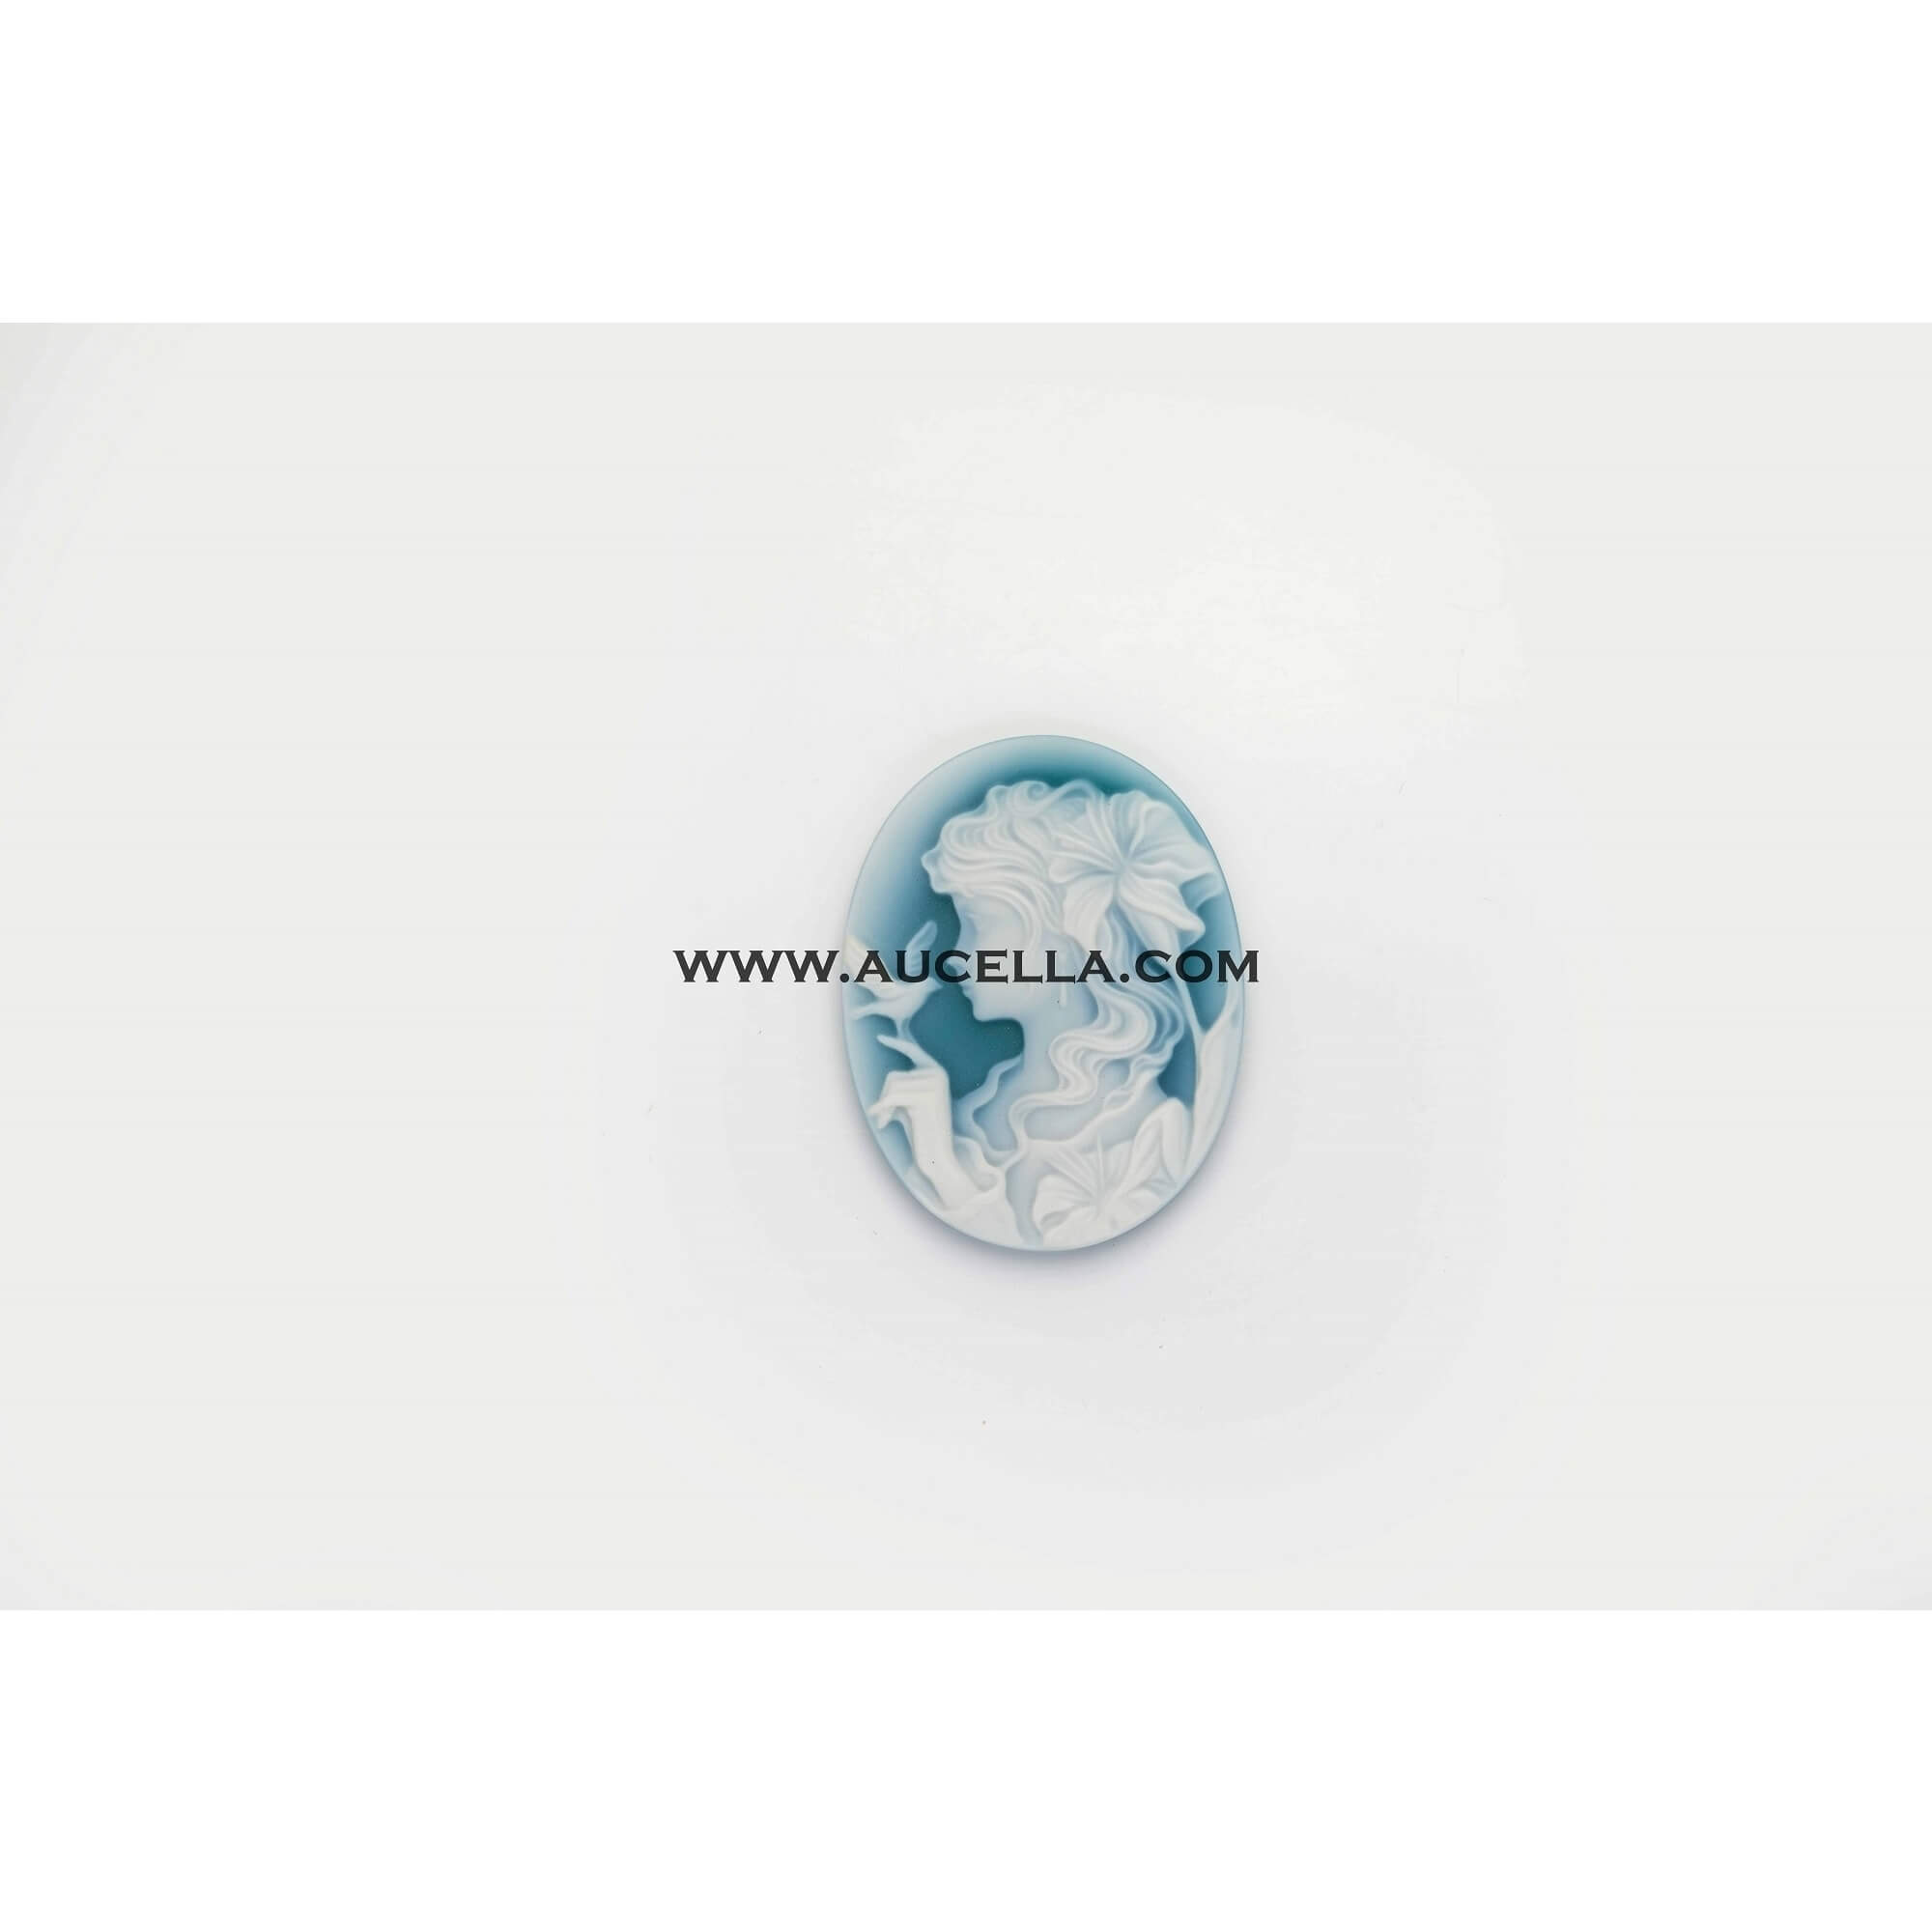 Agate cameo 45 mm